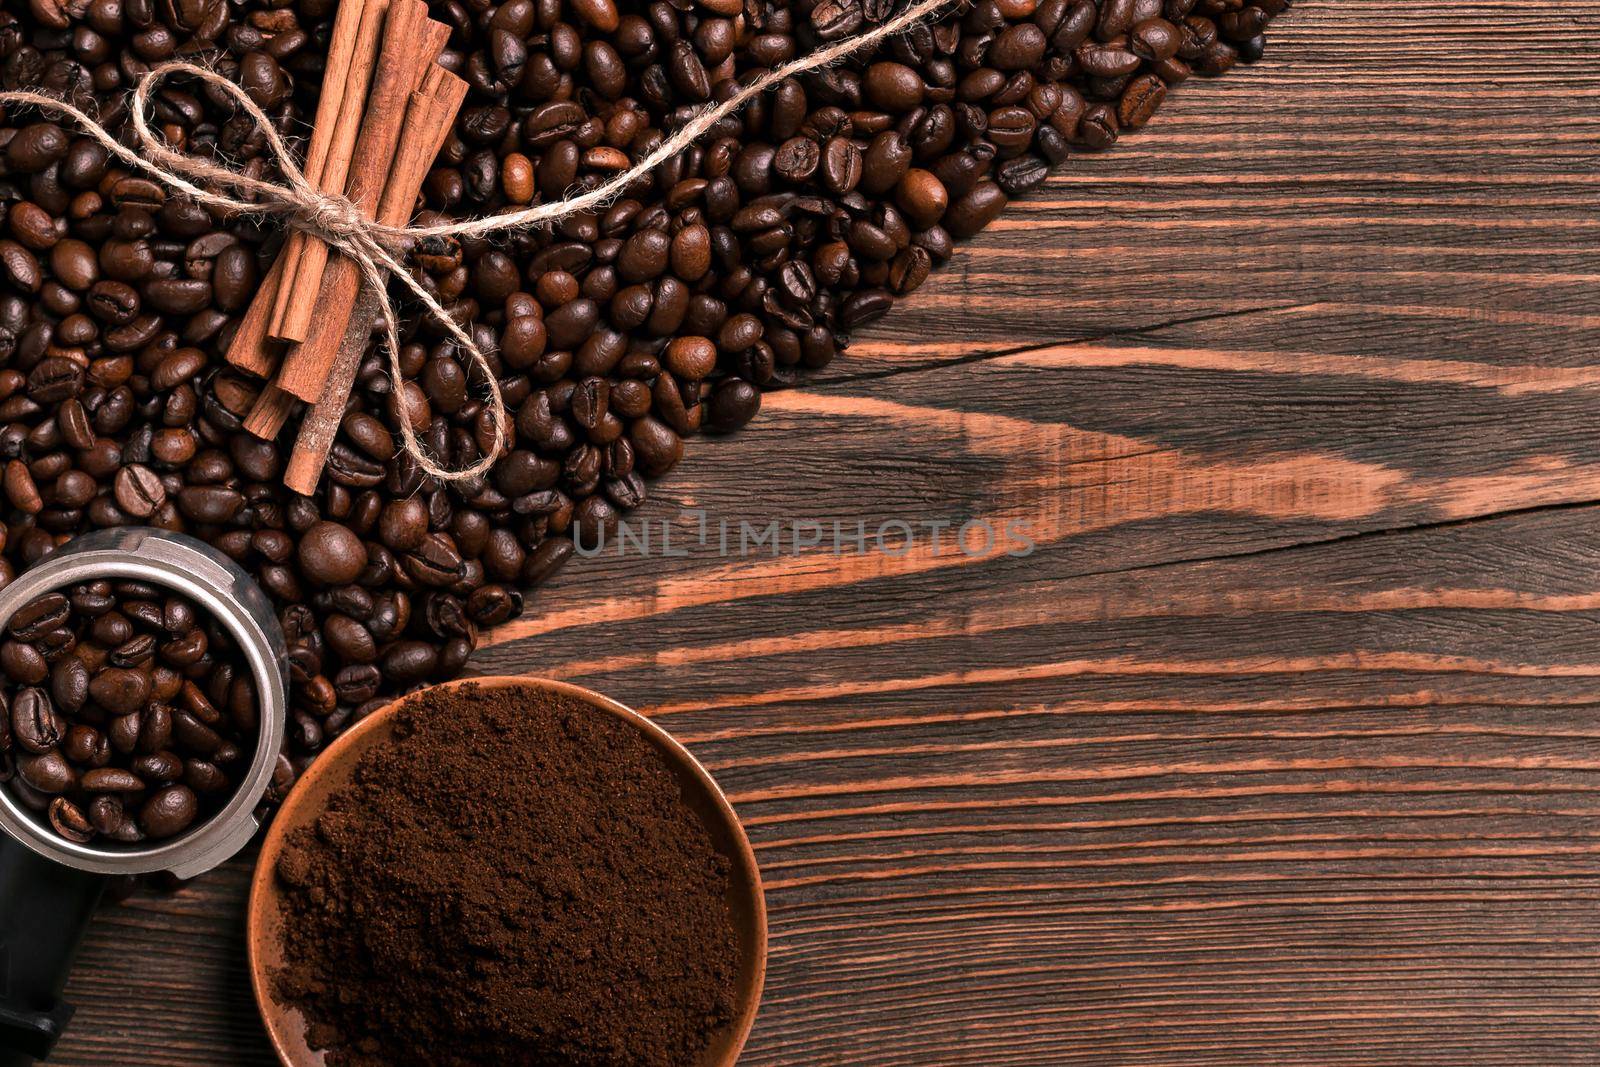 Coffee beans, cinnamon sticks and ground coffee on rustic wooden table, view from above with space for text. Still life. Mock-up. Flat lay